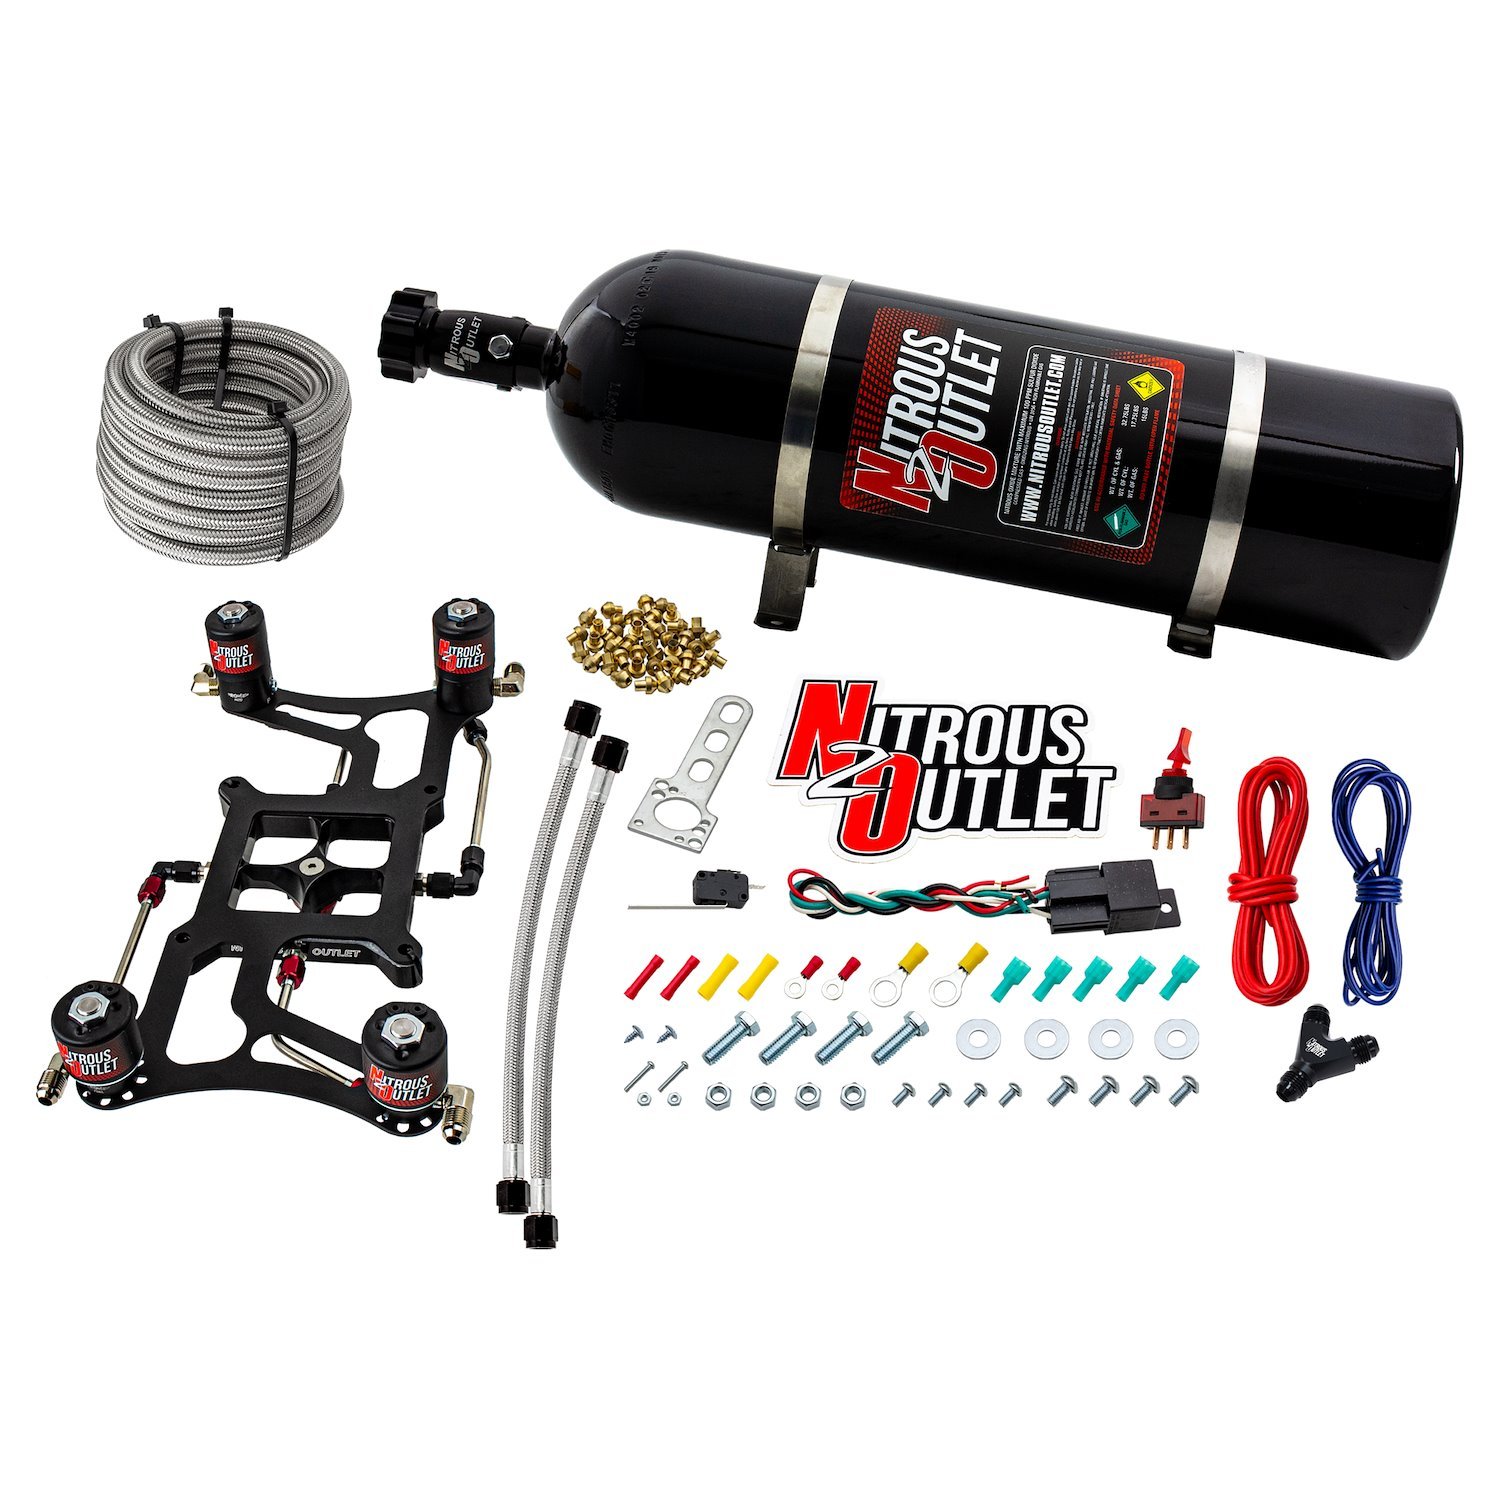 00-10628-15 4150 Hornet 2 Race Dual-Stage System, Hard-Line